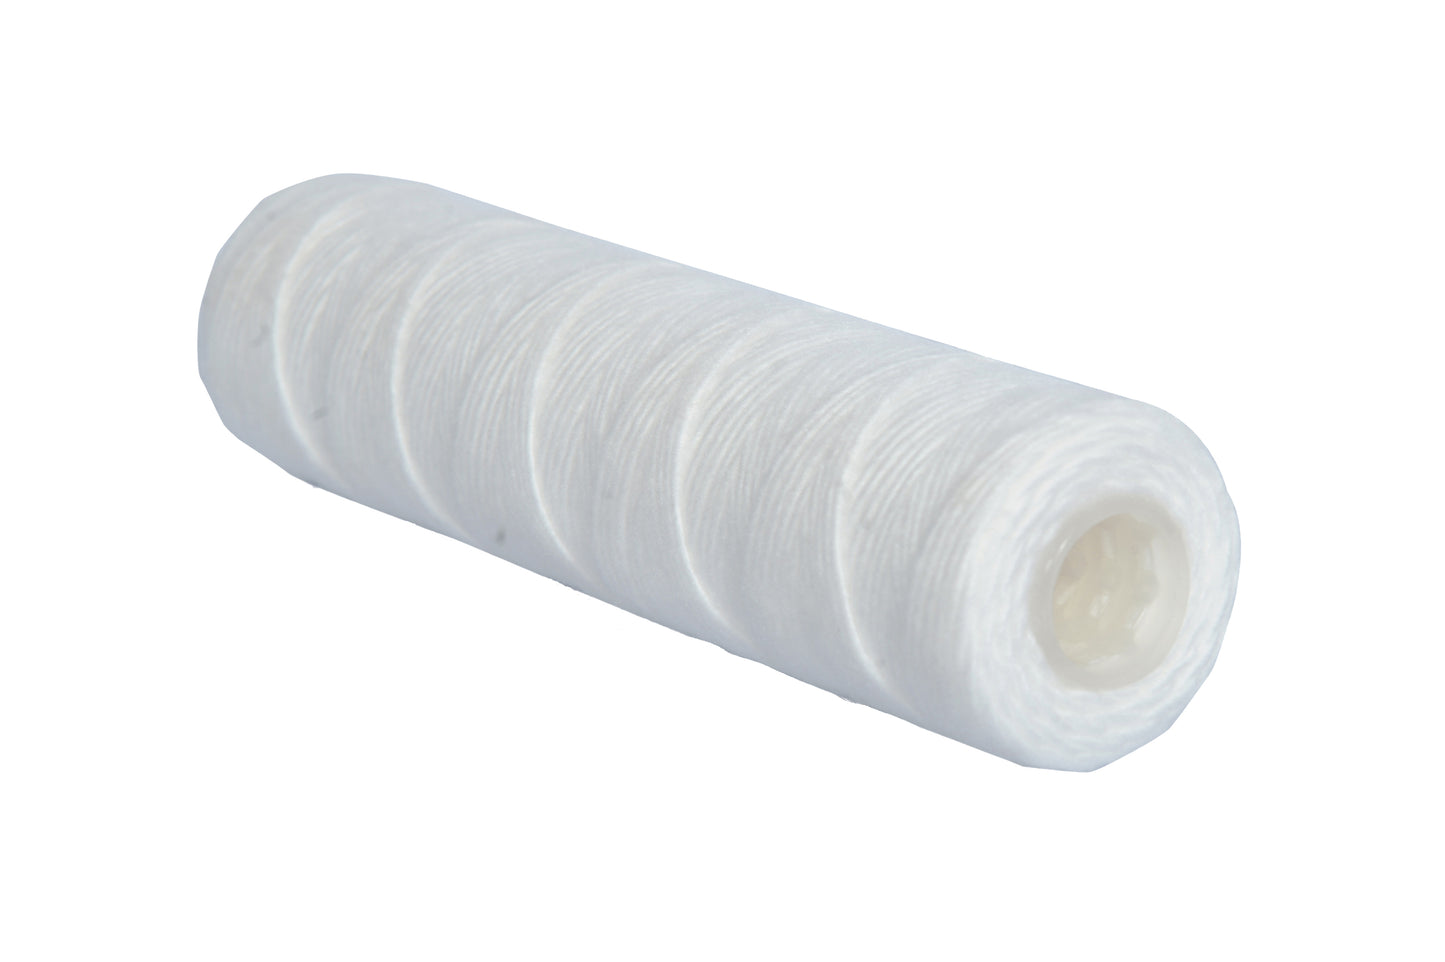 PreRO Yarn Wounded Replacement Filter Cartridge for prefilter (10 Inch, 5 Micron)